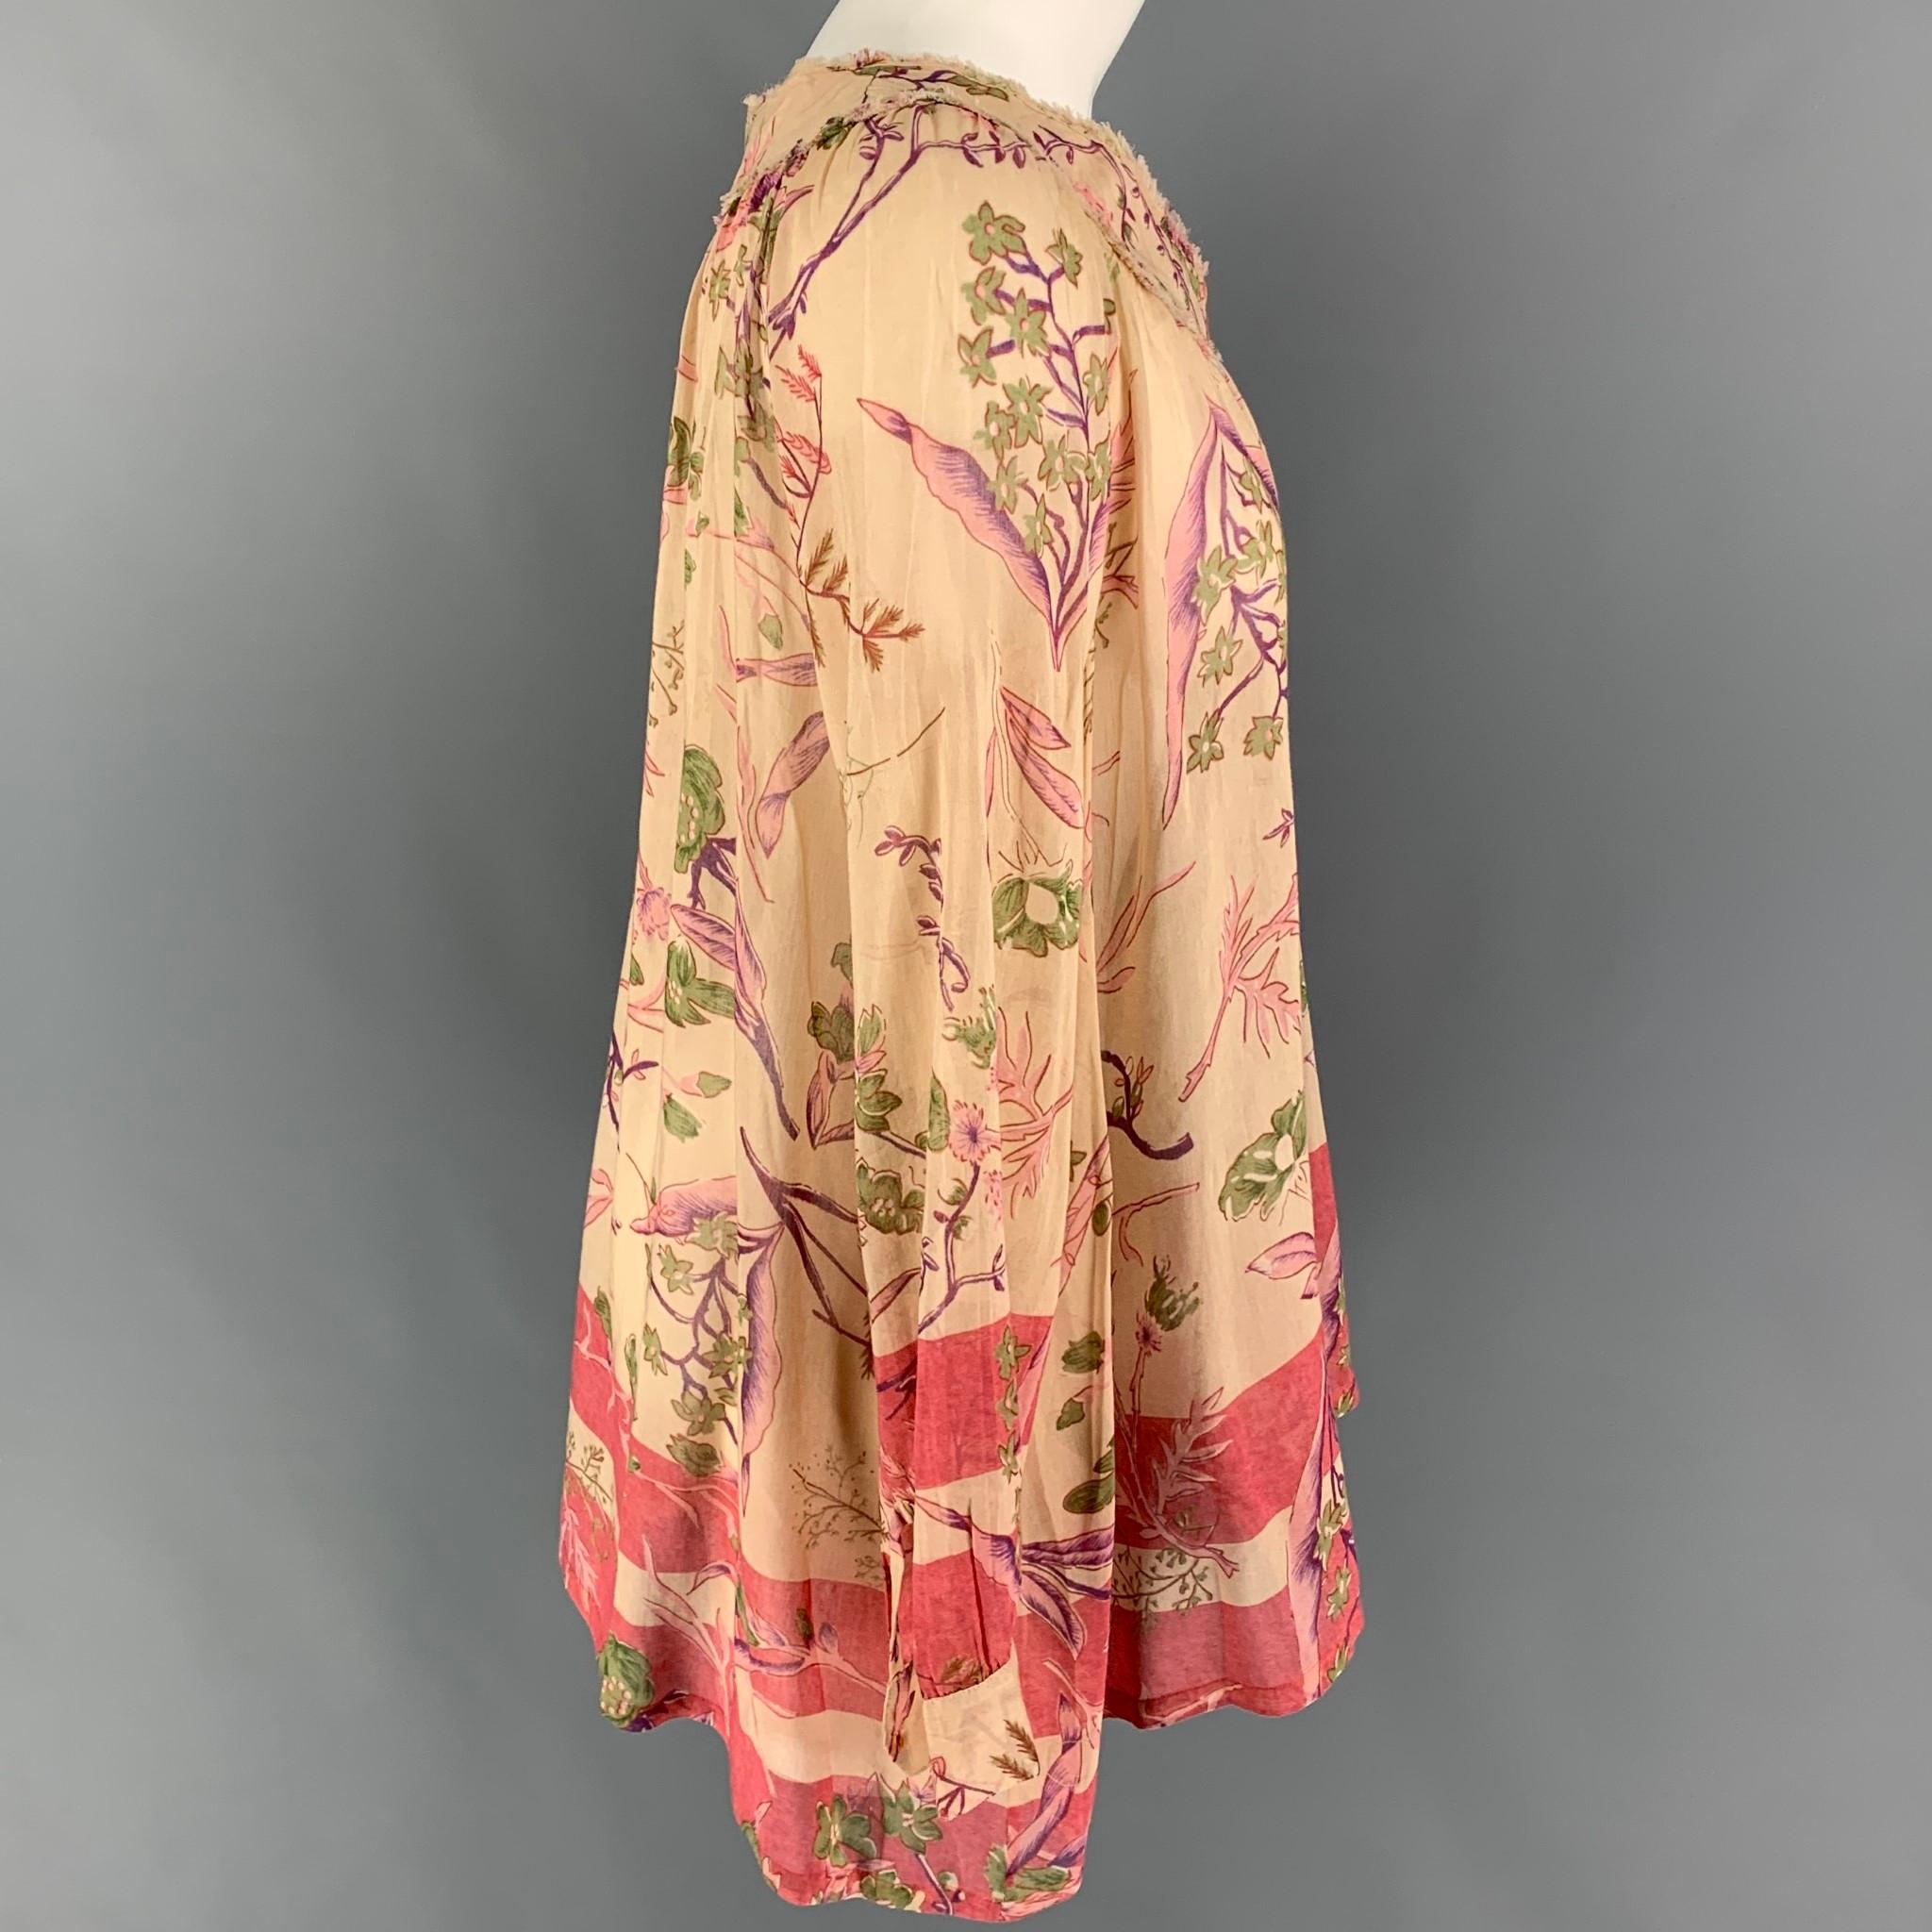 DONNA KARAN blouse comes in a beige & print floral silk featuring a tunic style, raw edge, and a buttoned closure. 

Very Good Pre-Owned Condition.
Marked: 6

Measurements:

Shoulder: 16 in.
Bust: 42 in.
Sleeve: 24 in.
Length: 27 in. 